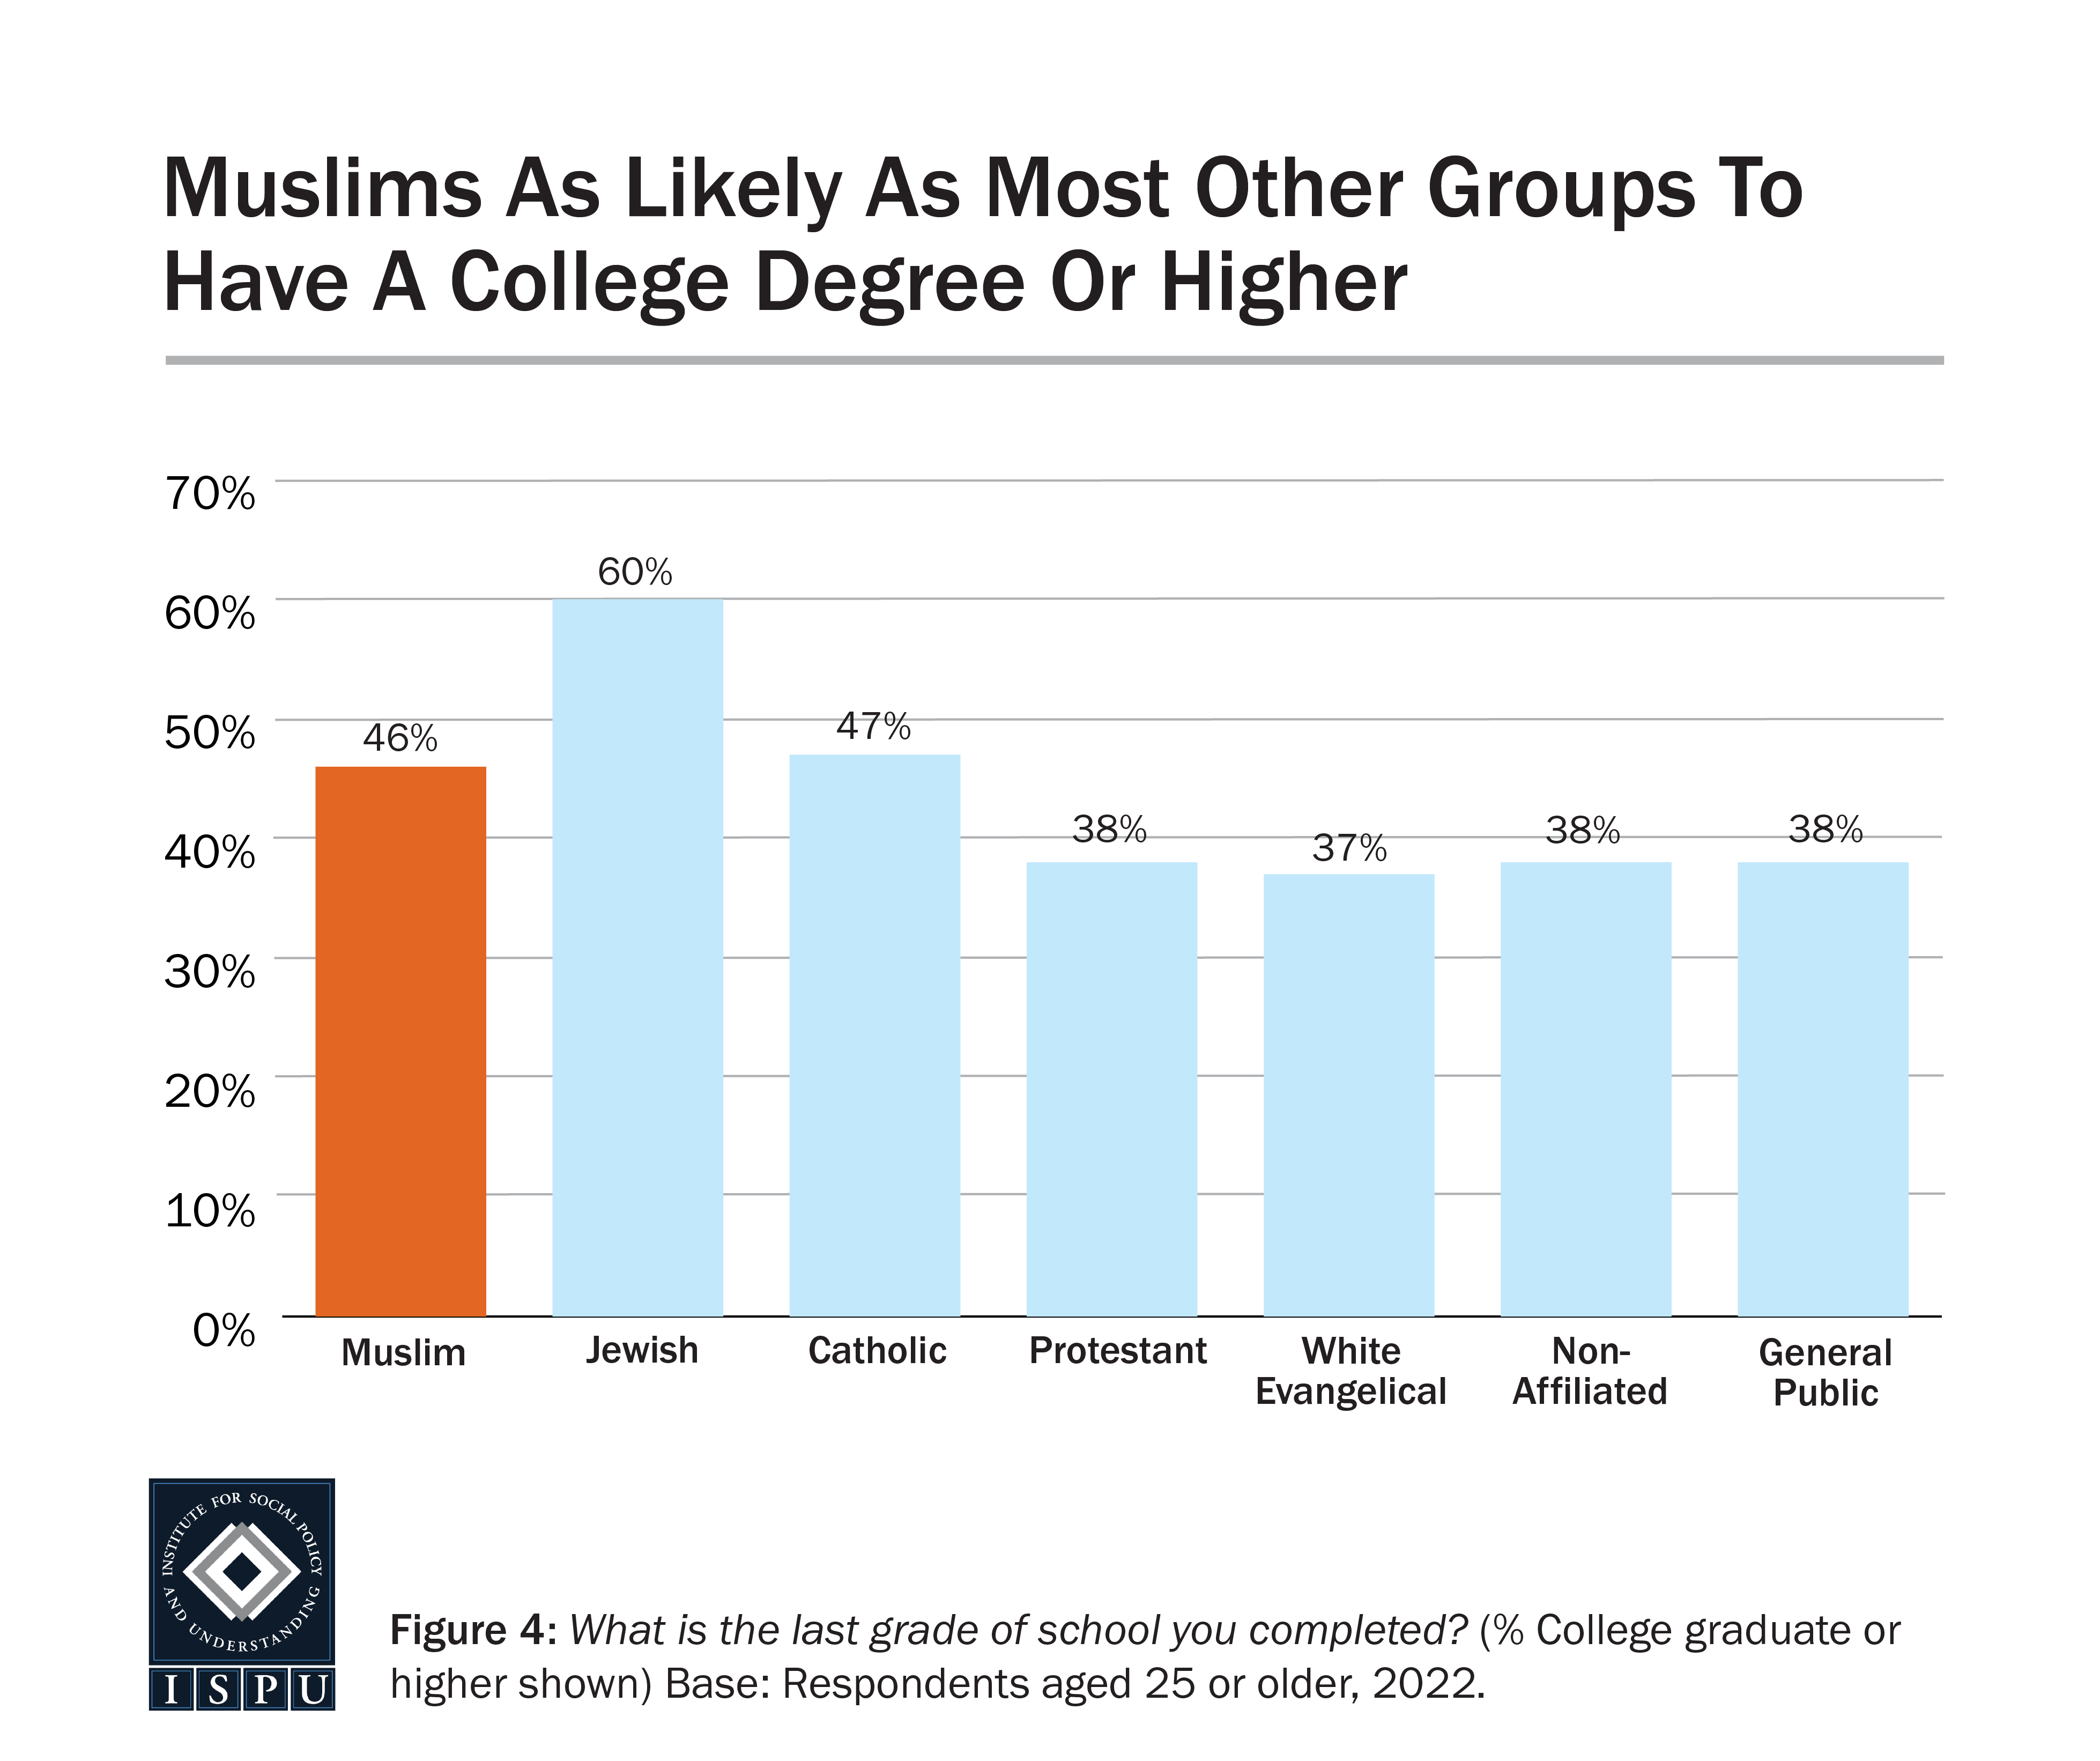 A bar graph showing that Muslims are on par with most other groups in having a college degree or higher